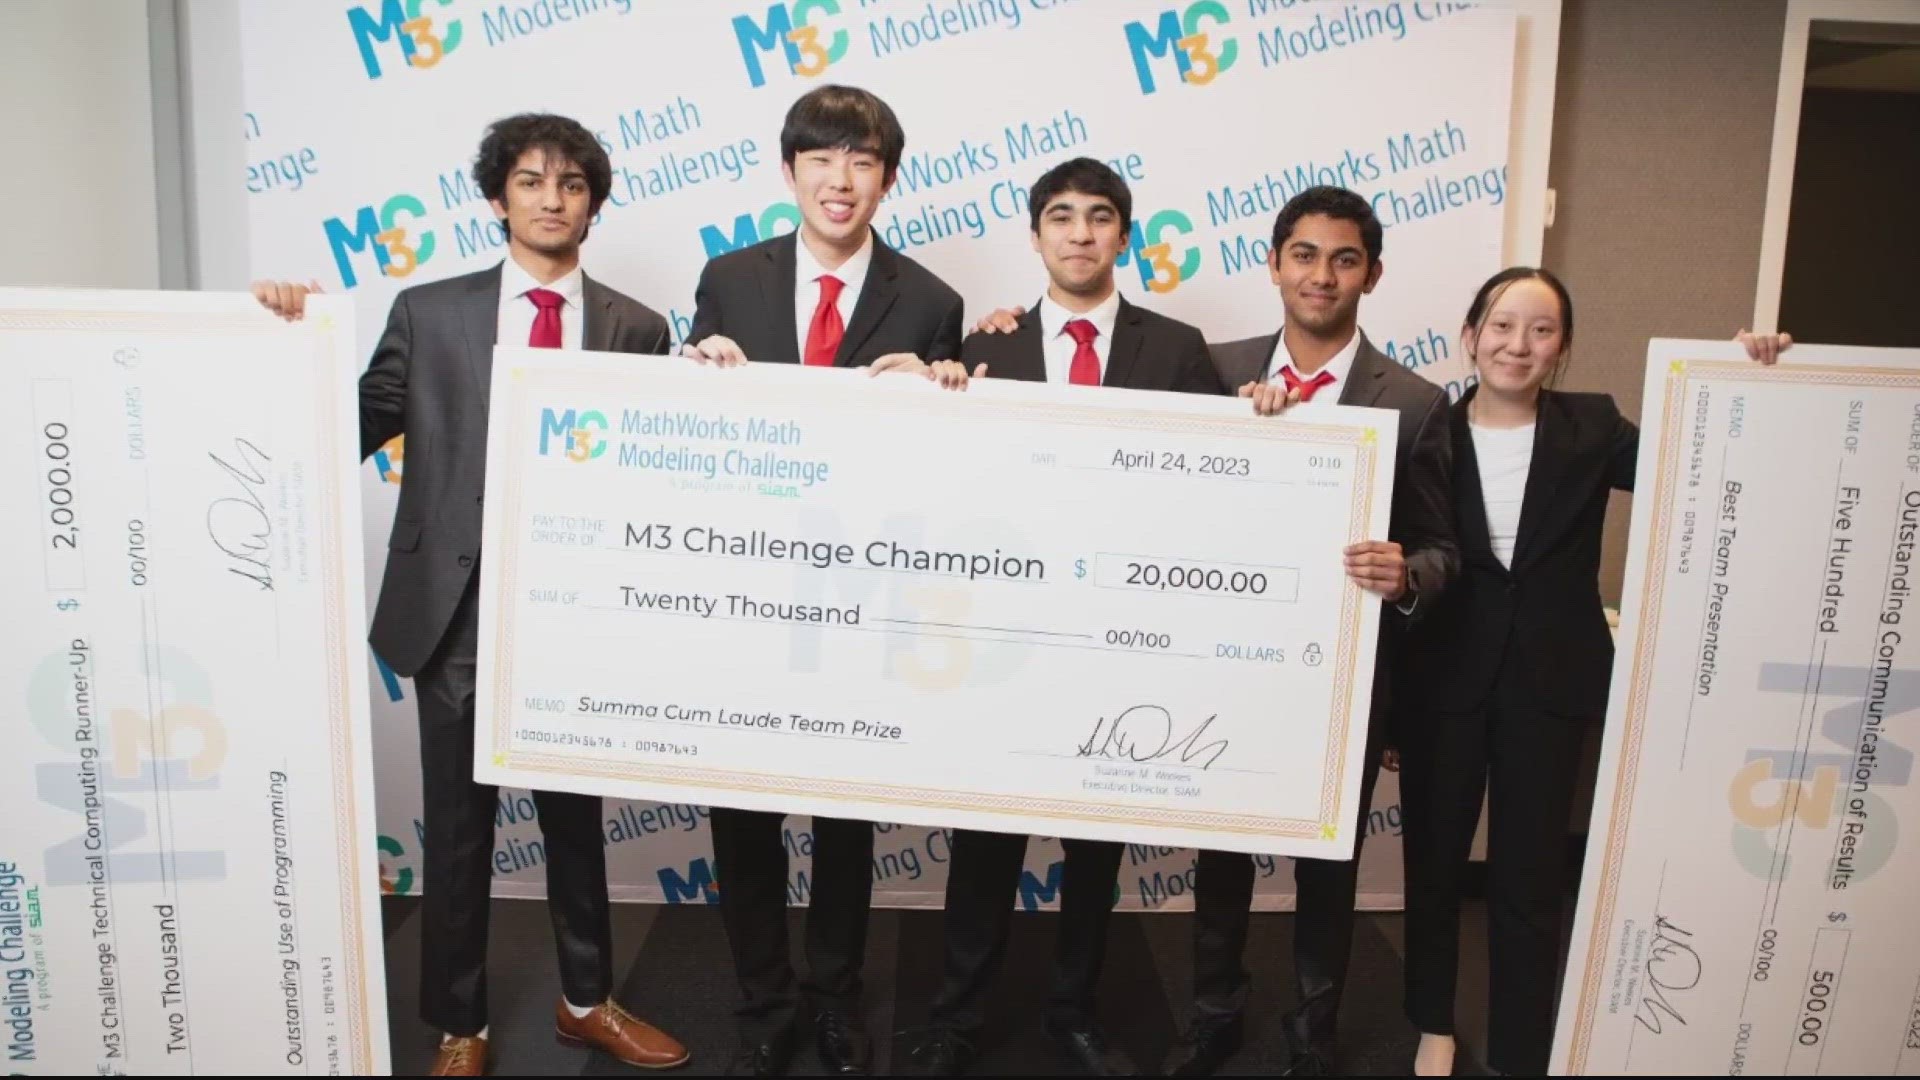 A team of local high school students won the top prize of $20,000 in a prestigious math competition.